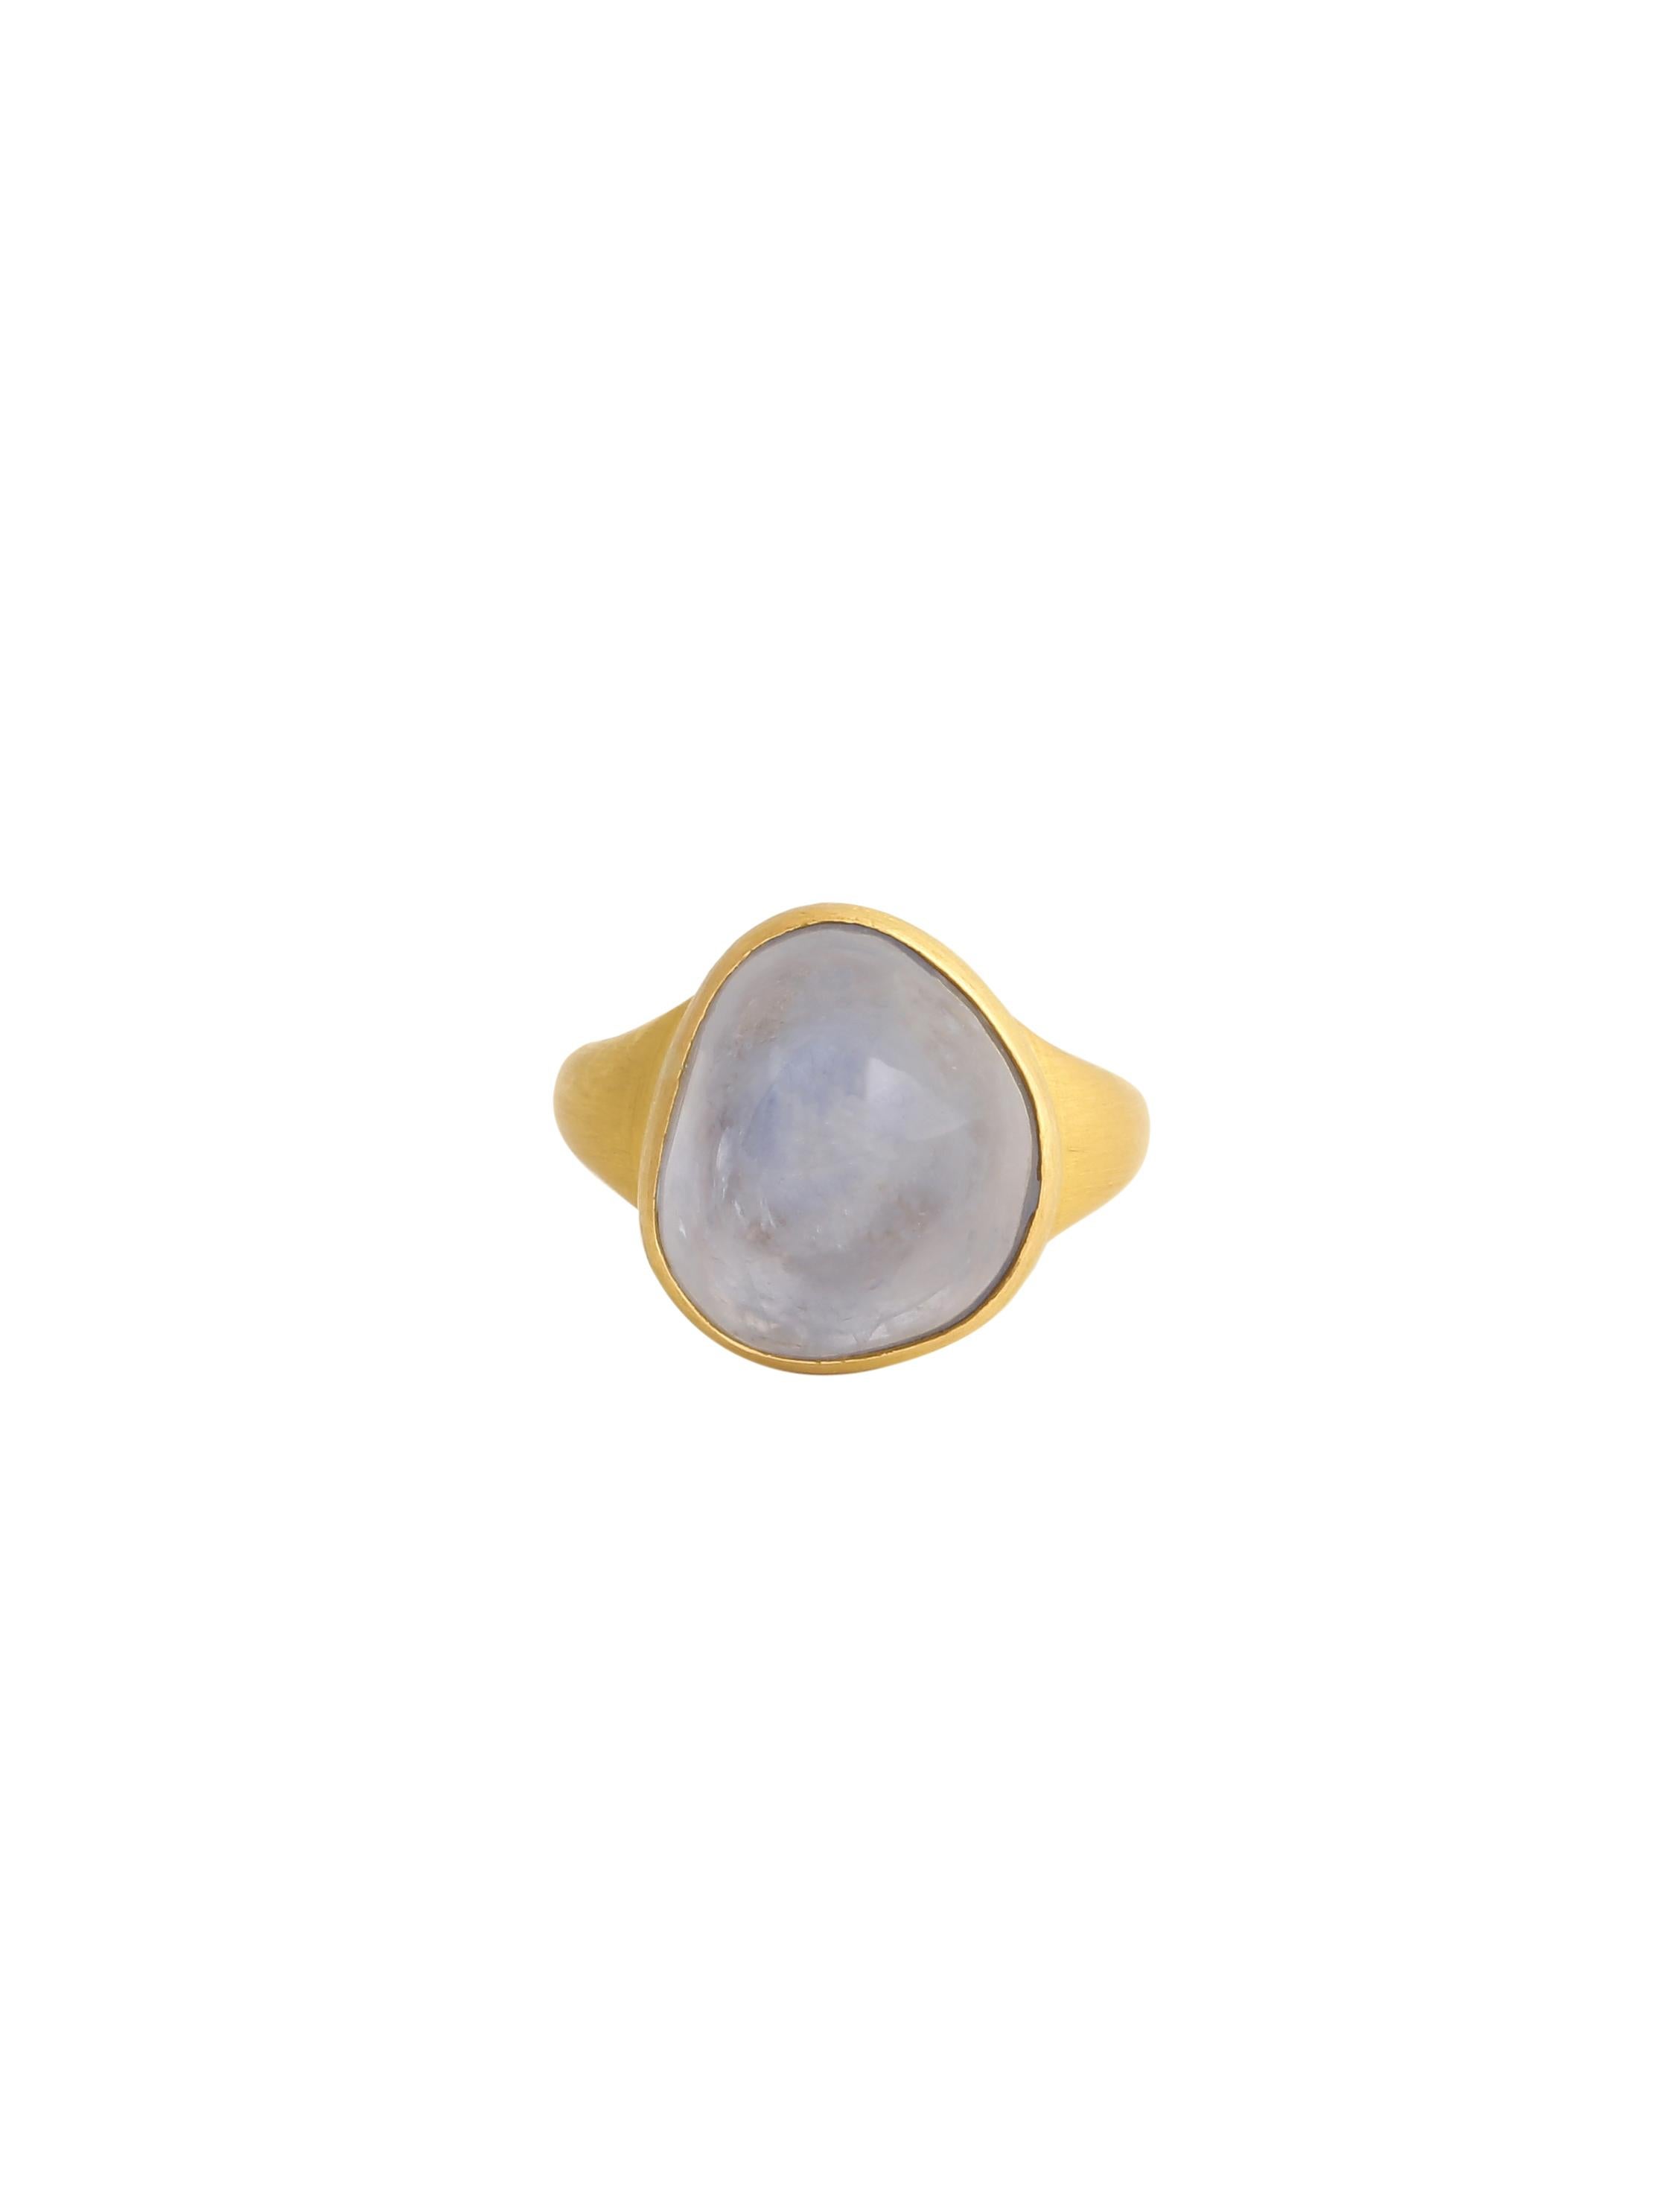 Women's or Men's Certified Natural Blue Sapphire Sugarloaf Cabochon Ring Handcrafted in 22k Gold